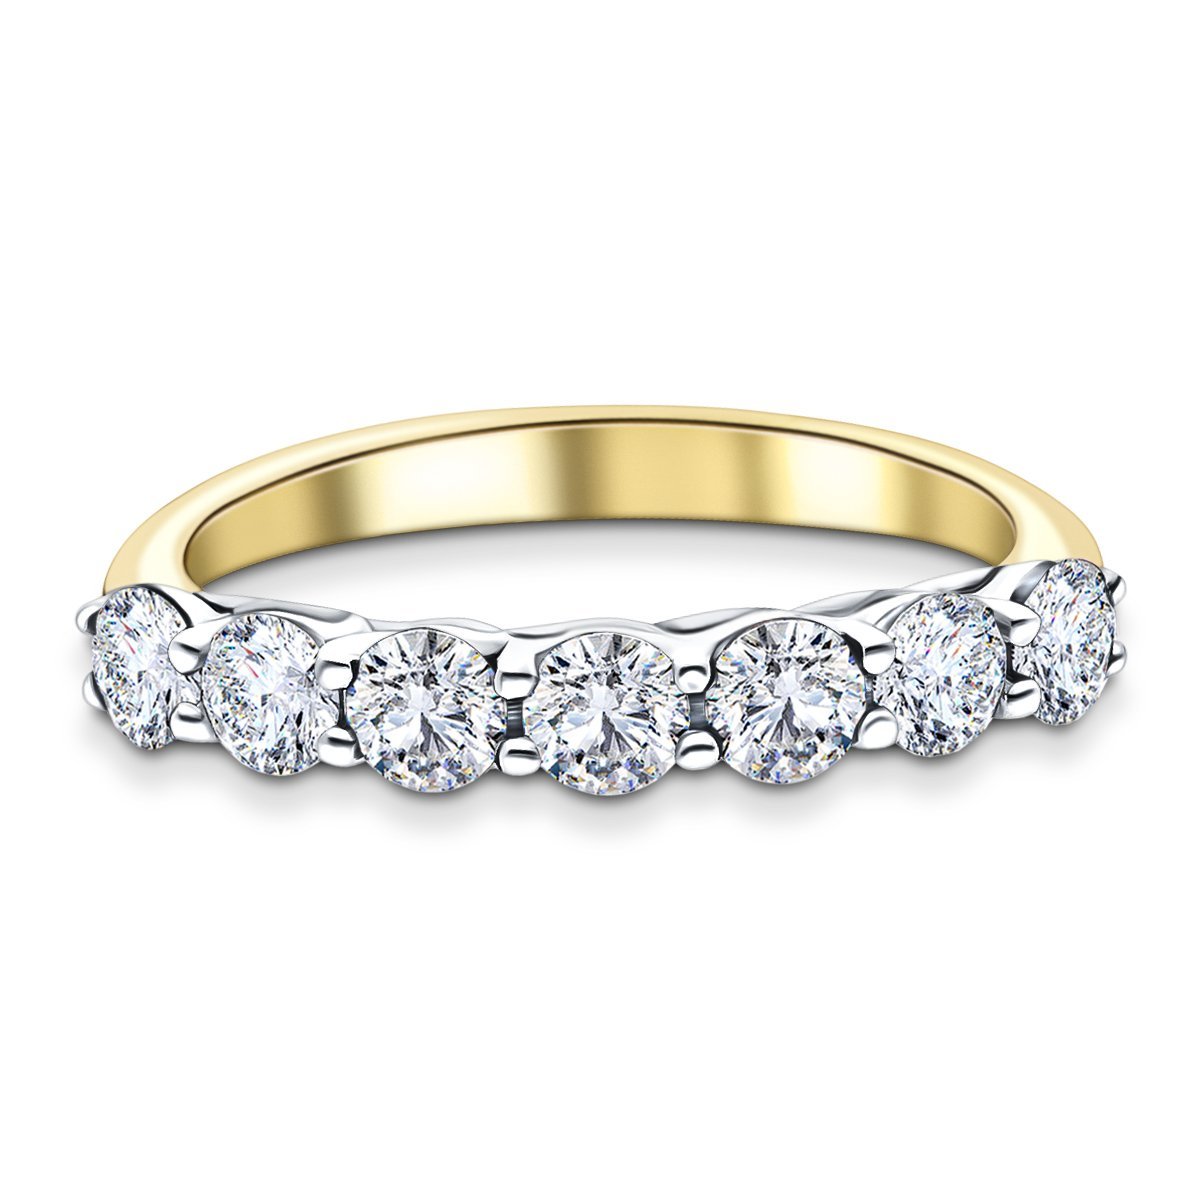 Seven Stone Diamond Ring with 0.75ct G/SI Quality in 18k Yellow Gold - All Diamond